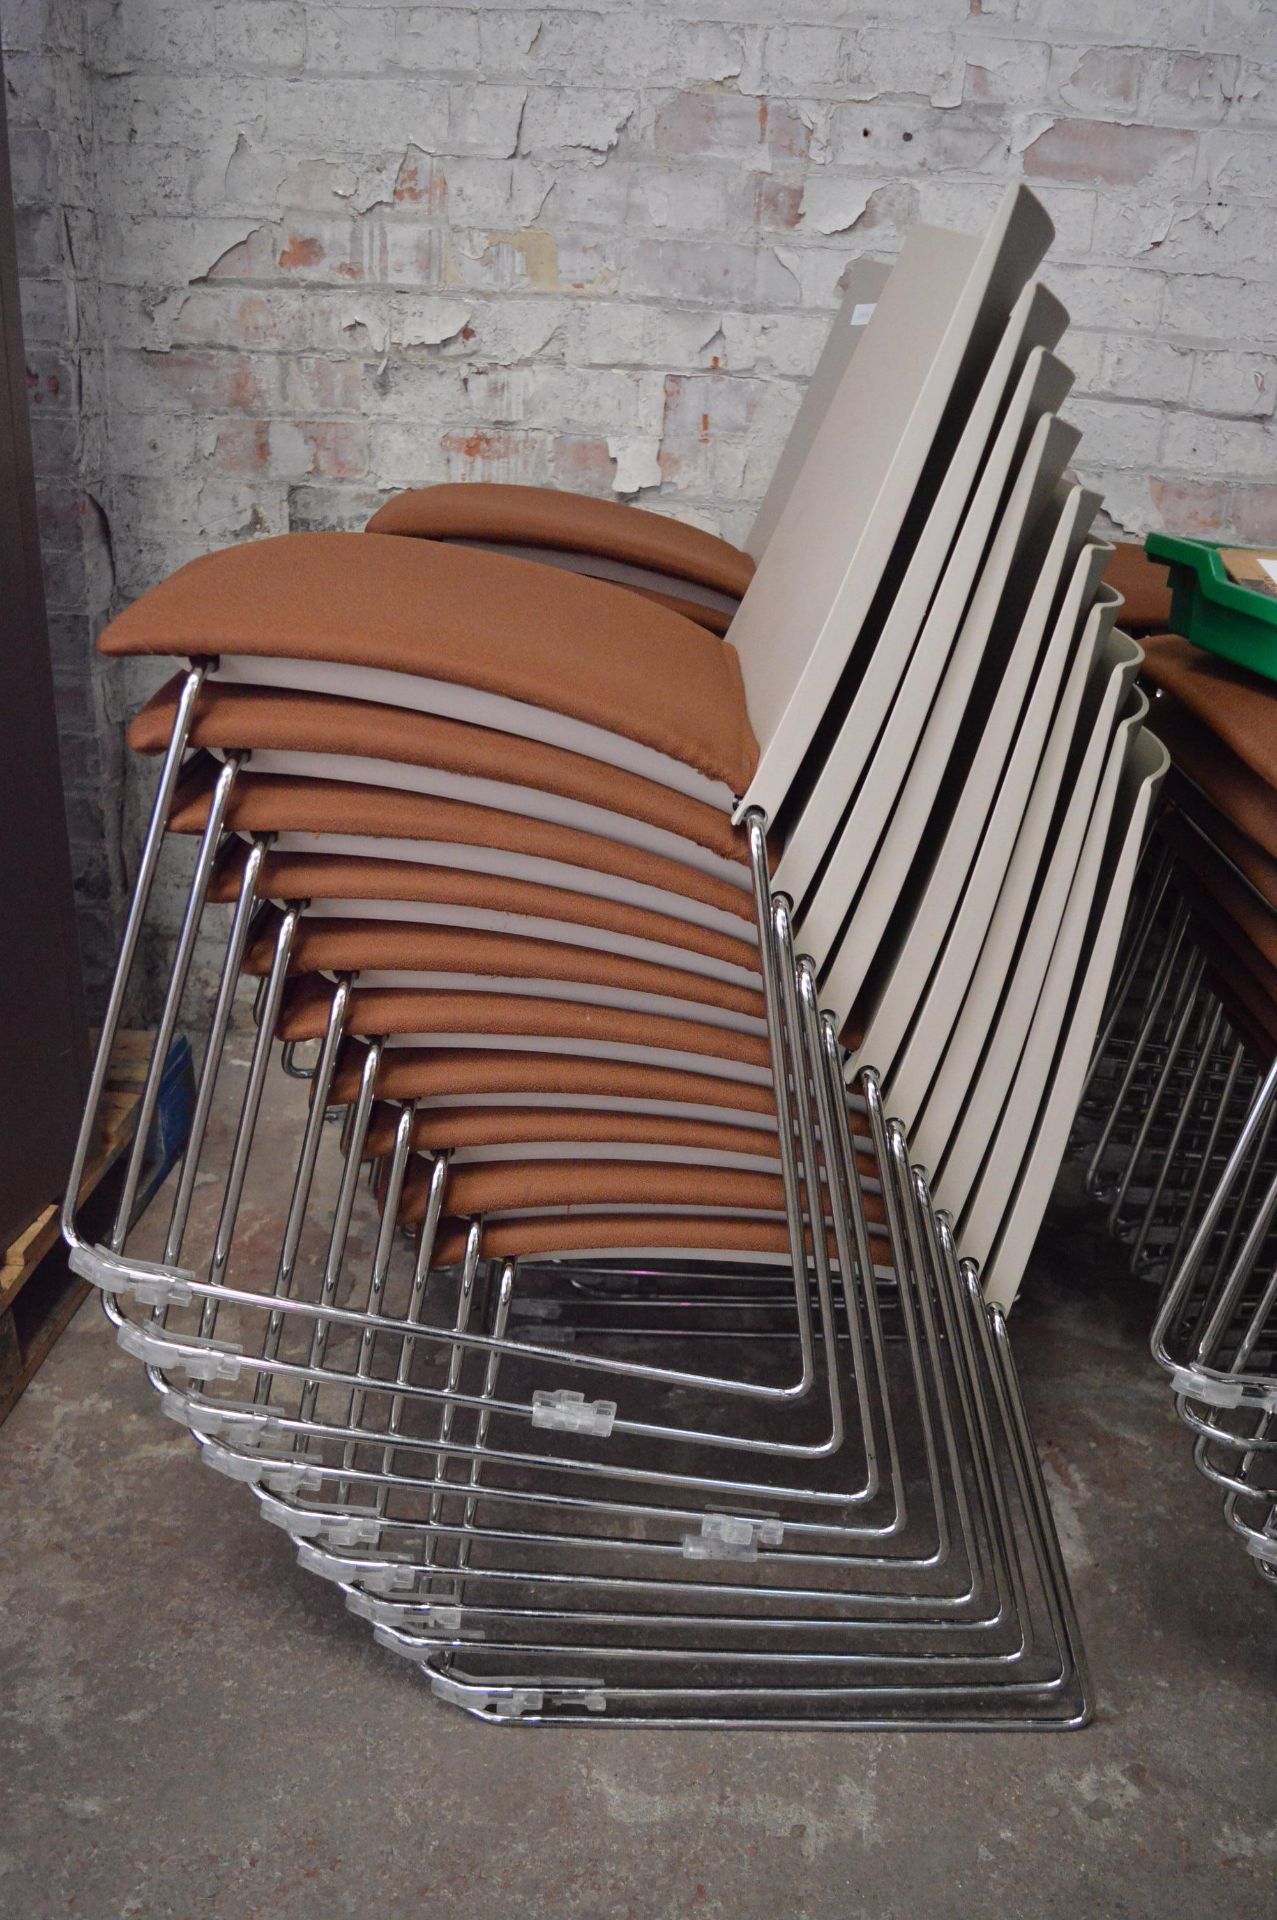 Ten Stackable Tubular Framed Chairs with Brown Upholstered Seats and Plastic Backs - Image 2 of 2